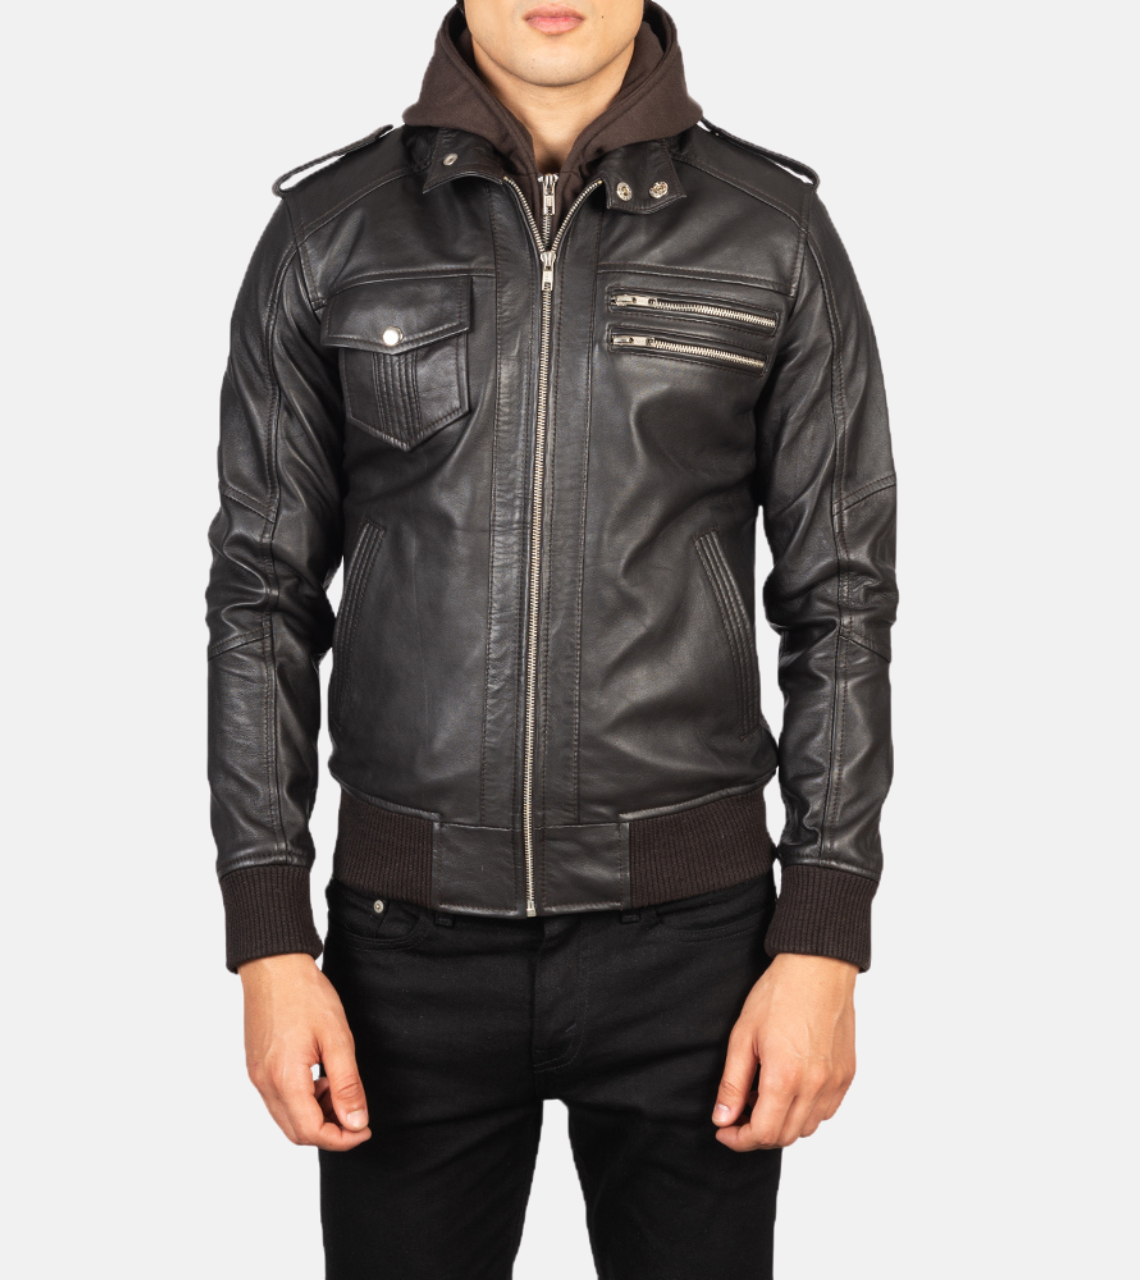 Mitico Brown Hooded Men's Leather Bomber Jacket